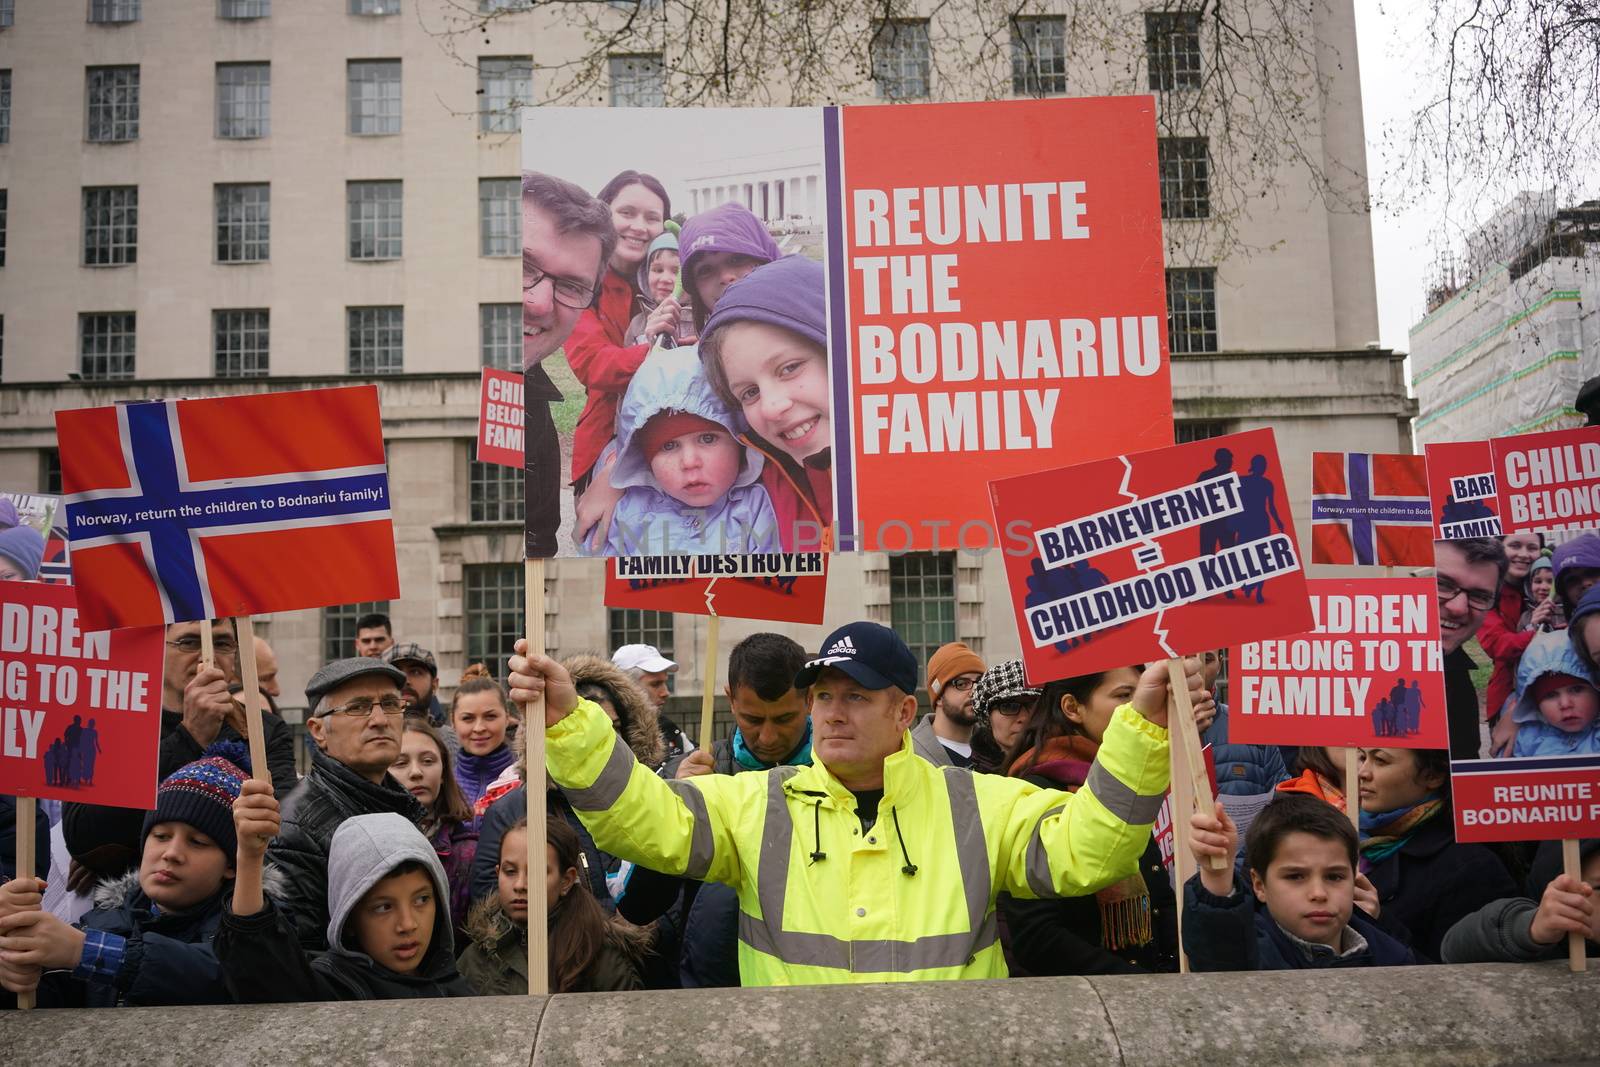 UNITED KINGDOM, London: Protesters hold placards reading Reunite the Bodnariu family or Children belong to the family during a demonstration to condemn legal kidnapping in Norway, in London, UK, on April 16, 2016. 